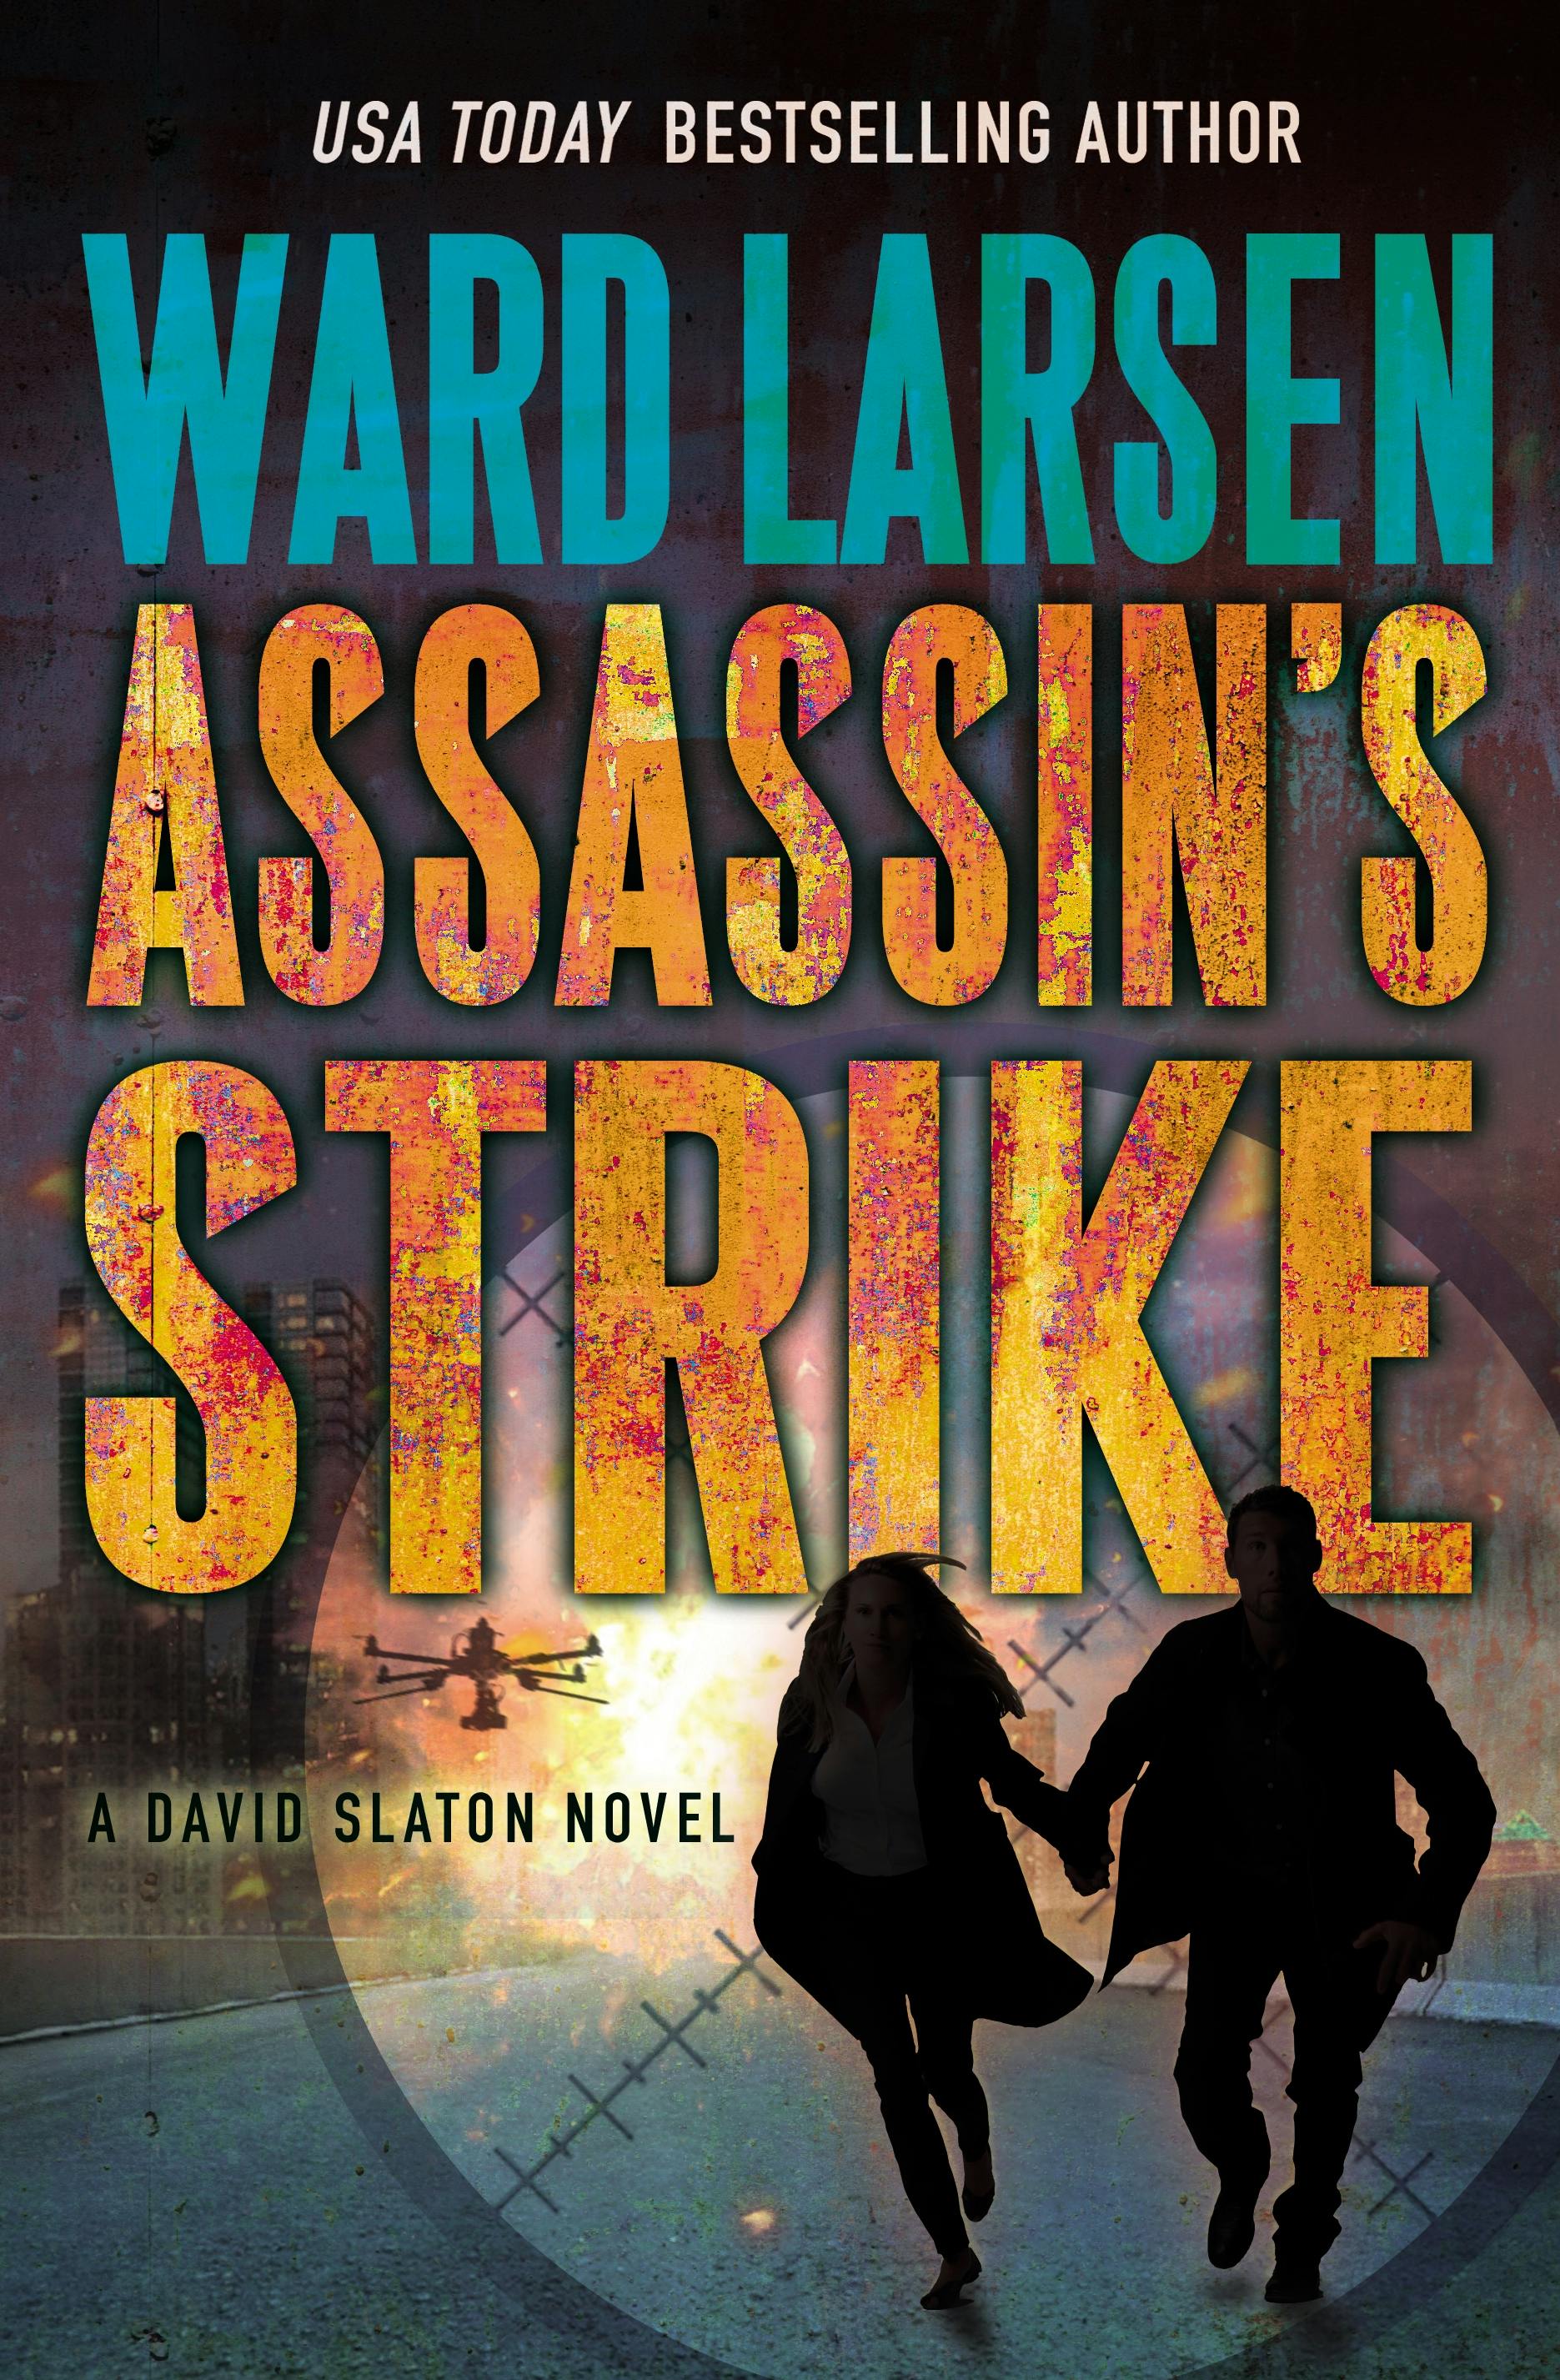 Cover for the book titled as: Assassin's Strike